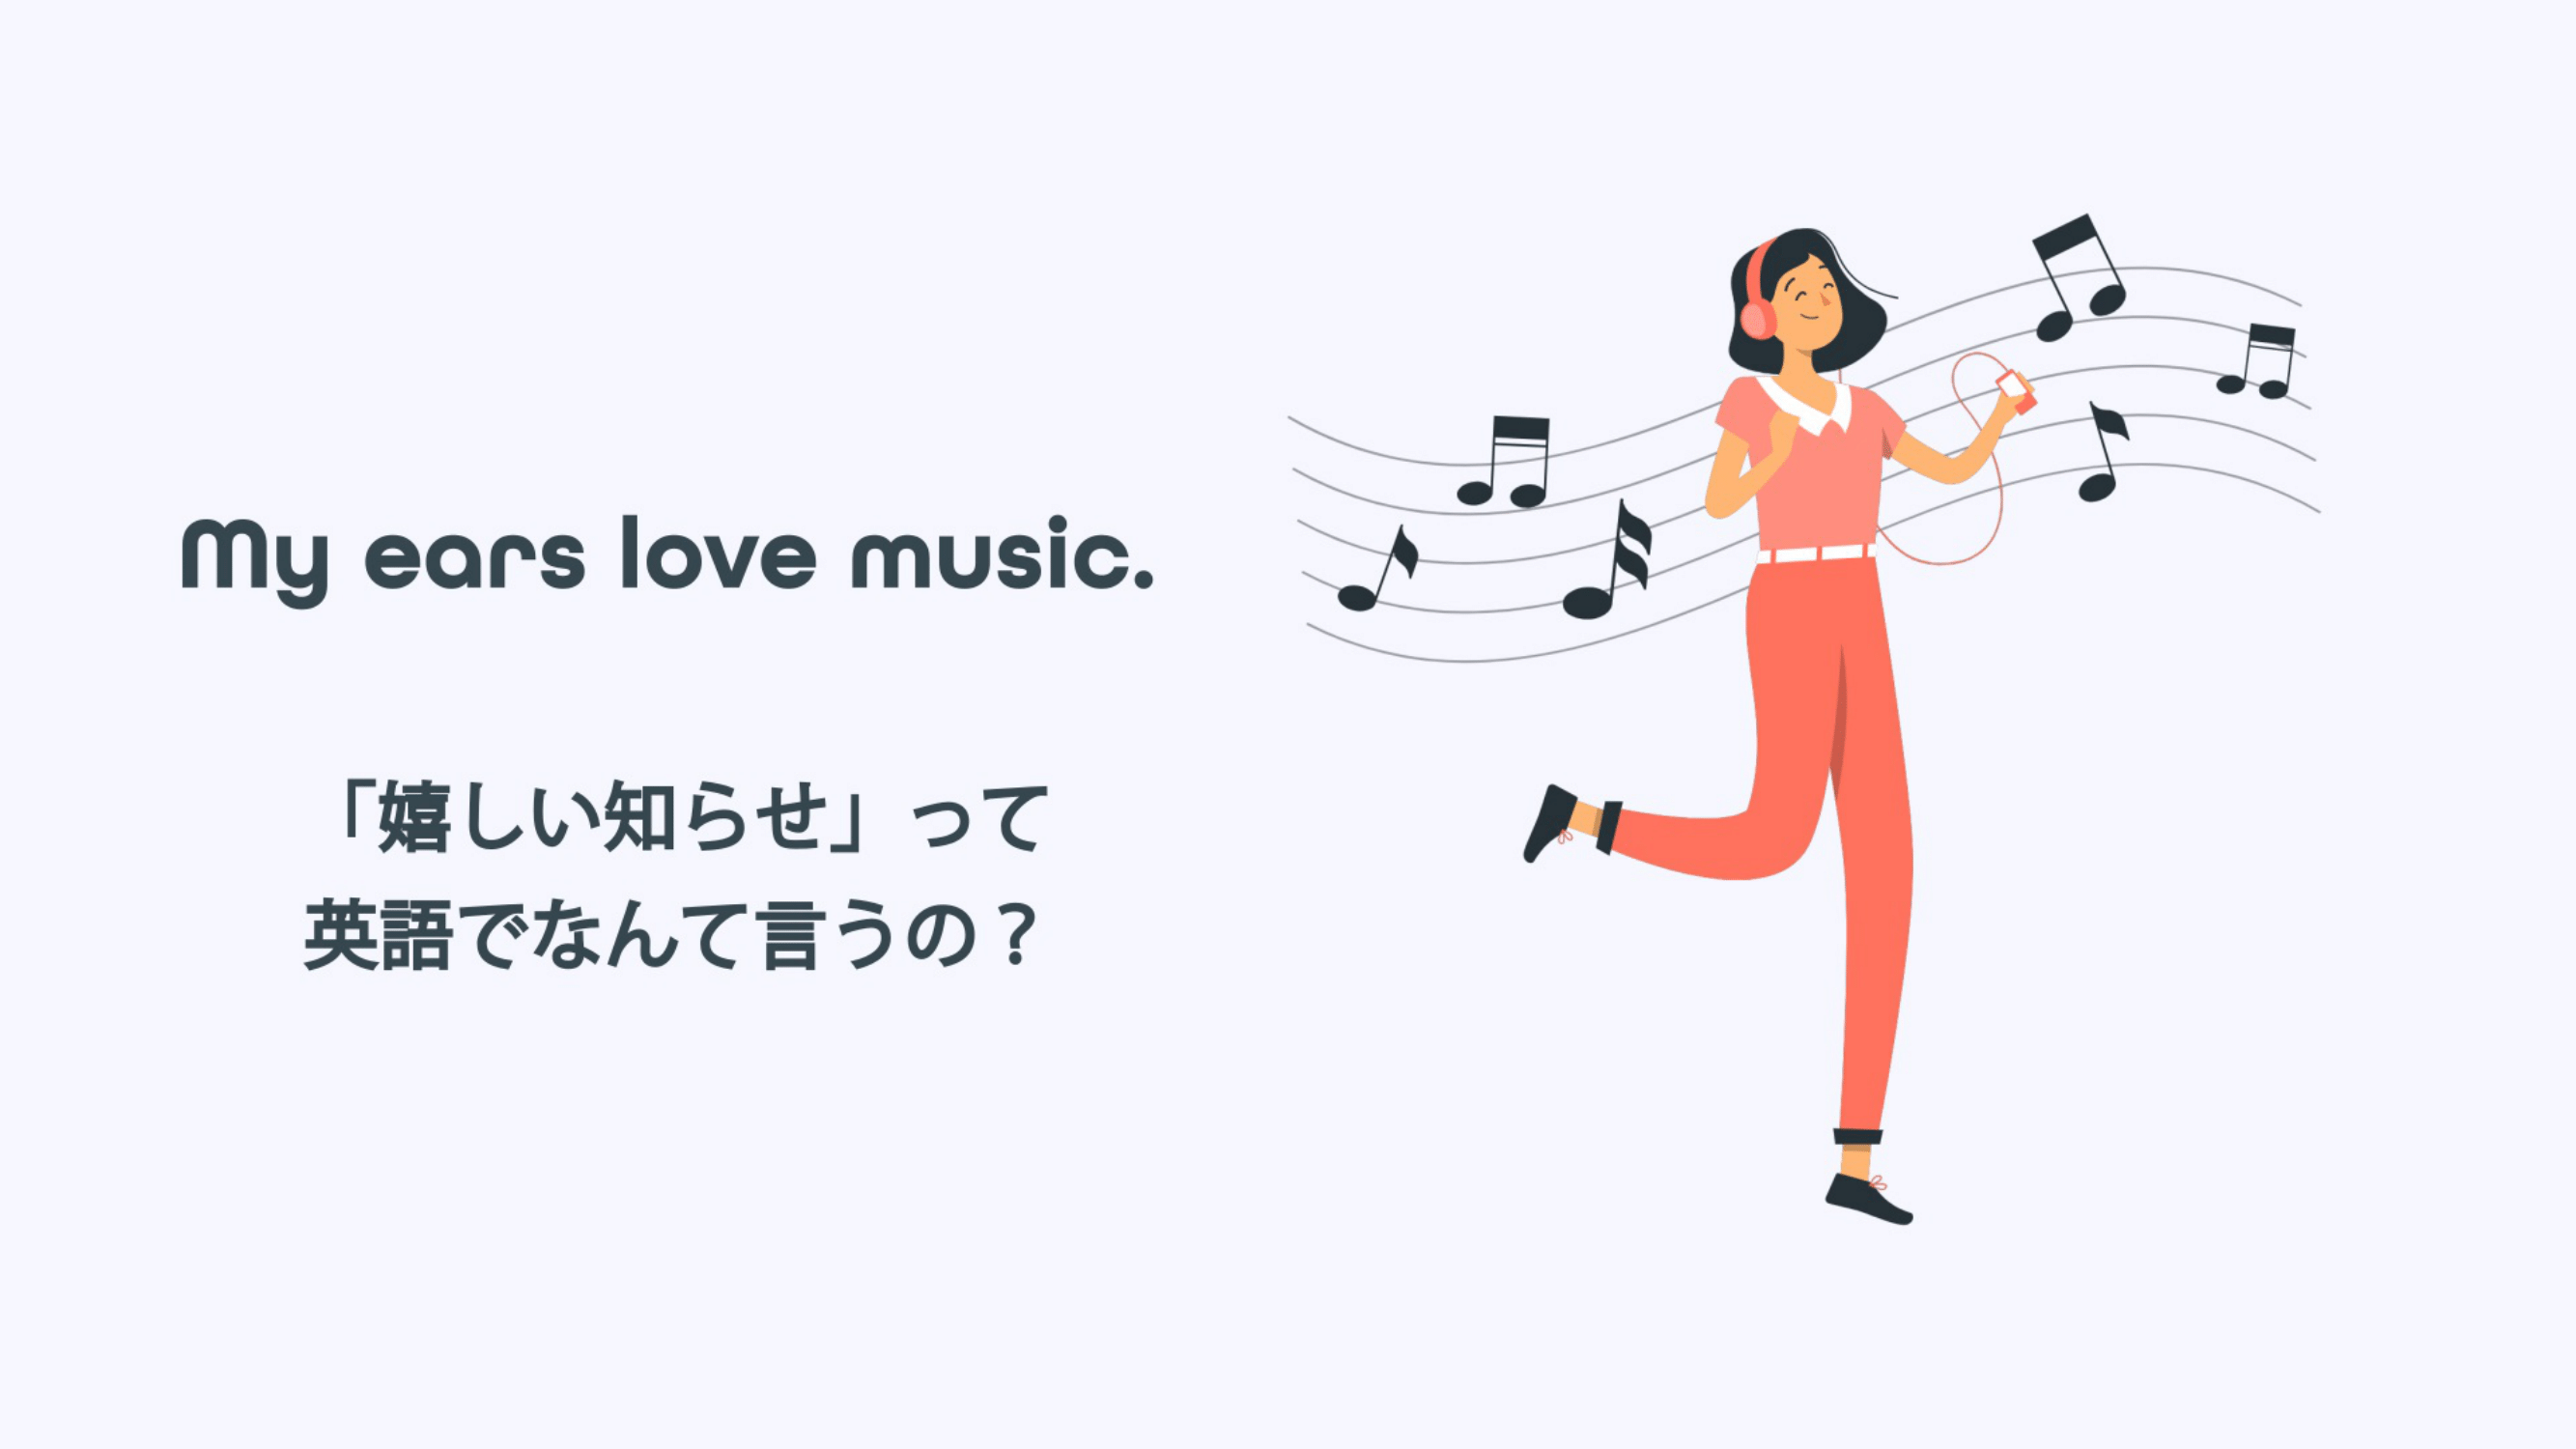 Featured image for “ My ears love music.「嬉しい知らせ」って英語でなんて言うの？”